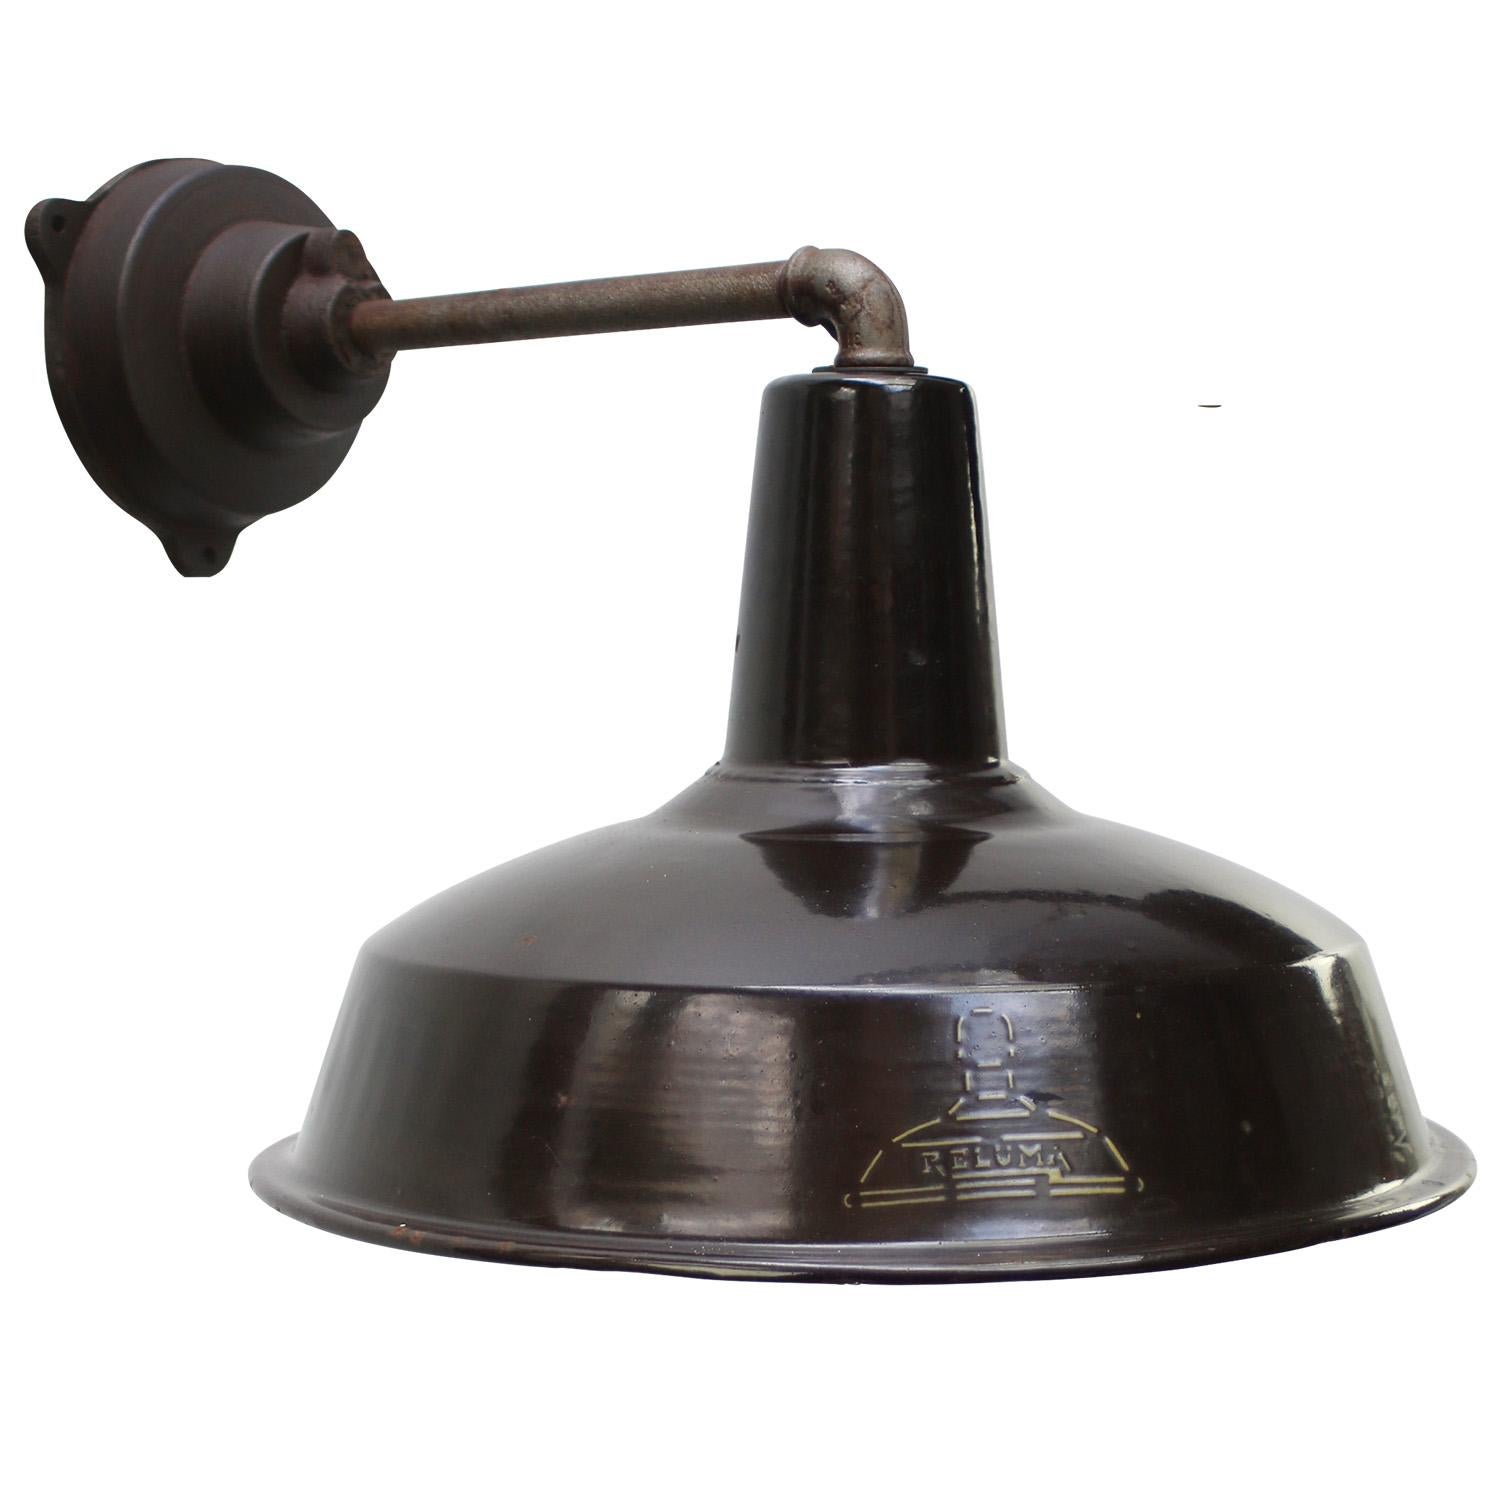 Belgian Factory Wall Light by Reluma, Belgium
Dark brown enamel, white interior

diameter cast iron wall piece: 12 cm, 3 holes to secure

Weight: 3.20 kg / 7.1 lb

Priced per individual item. All lamps have been made suitable by international